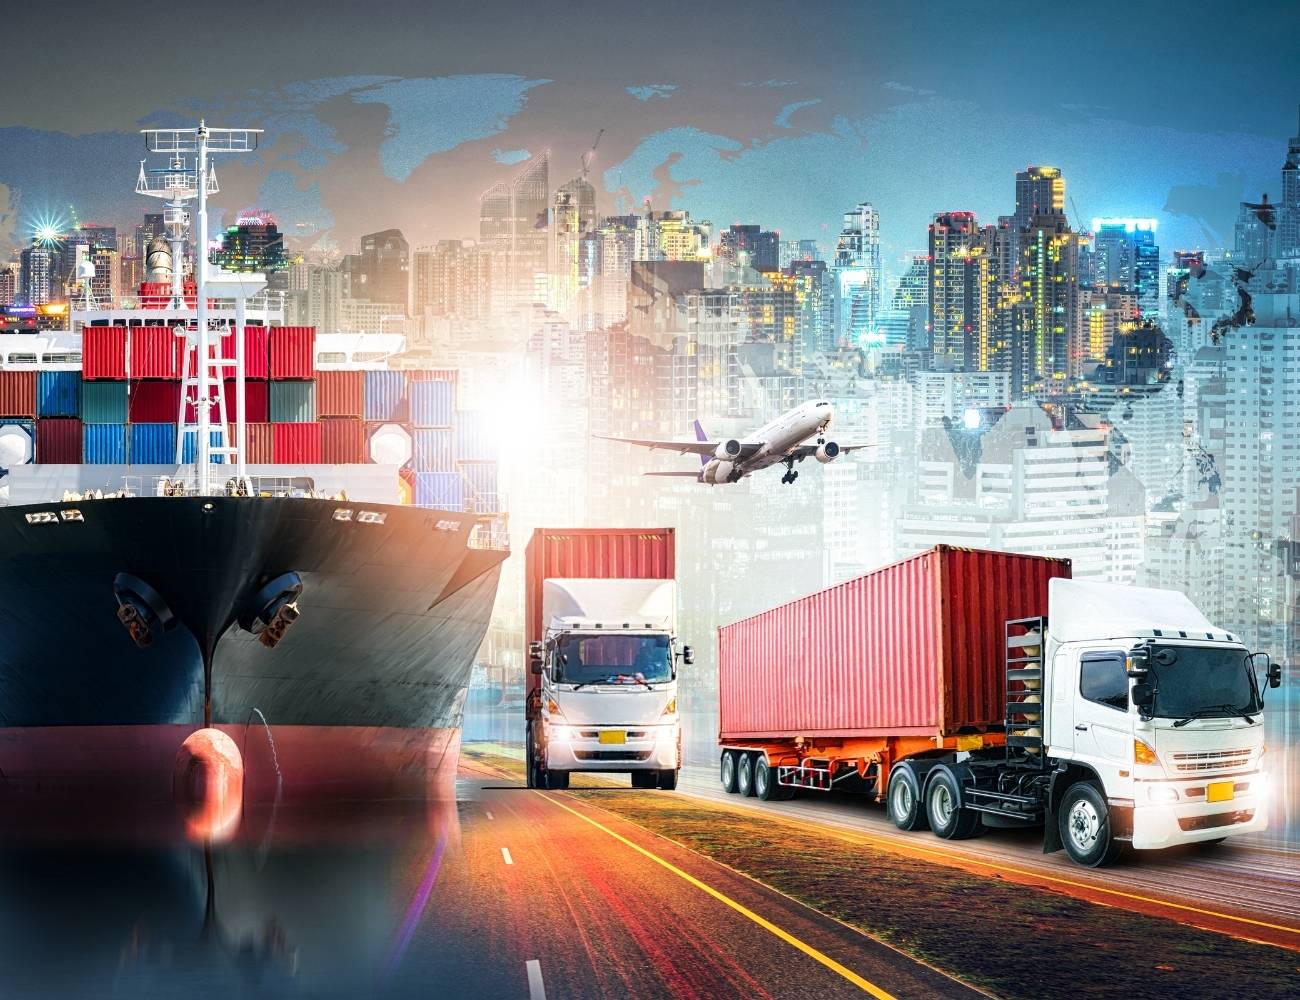                     What You Need to Know About Export Duty Adjustments
                                        